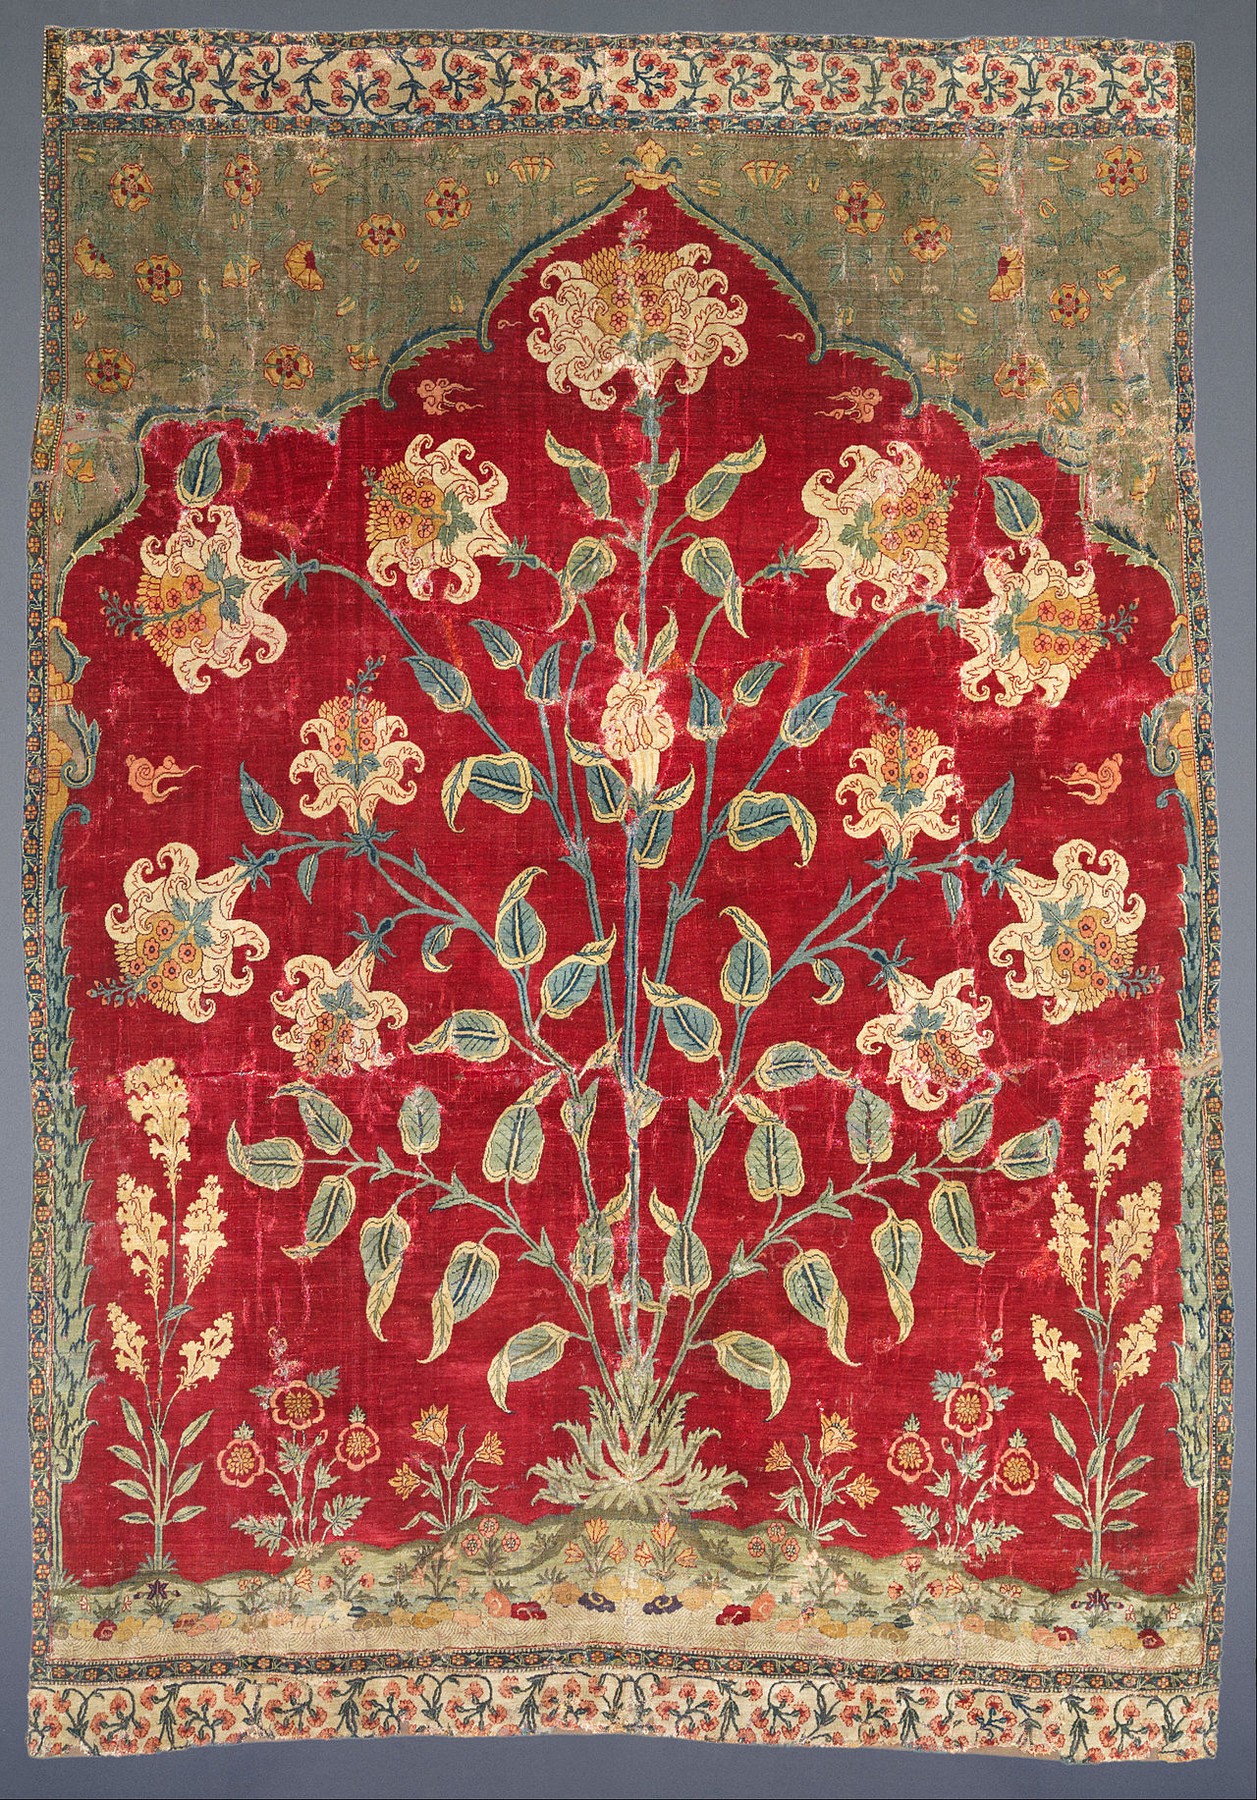 1280px-unknown-_india_-_fragment_of_a_saf_carpet_-_google_art_project.jpg